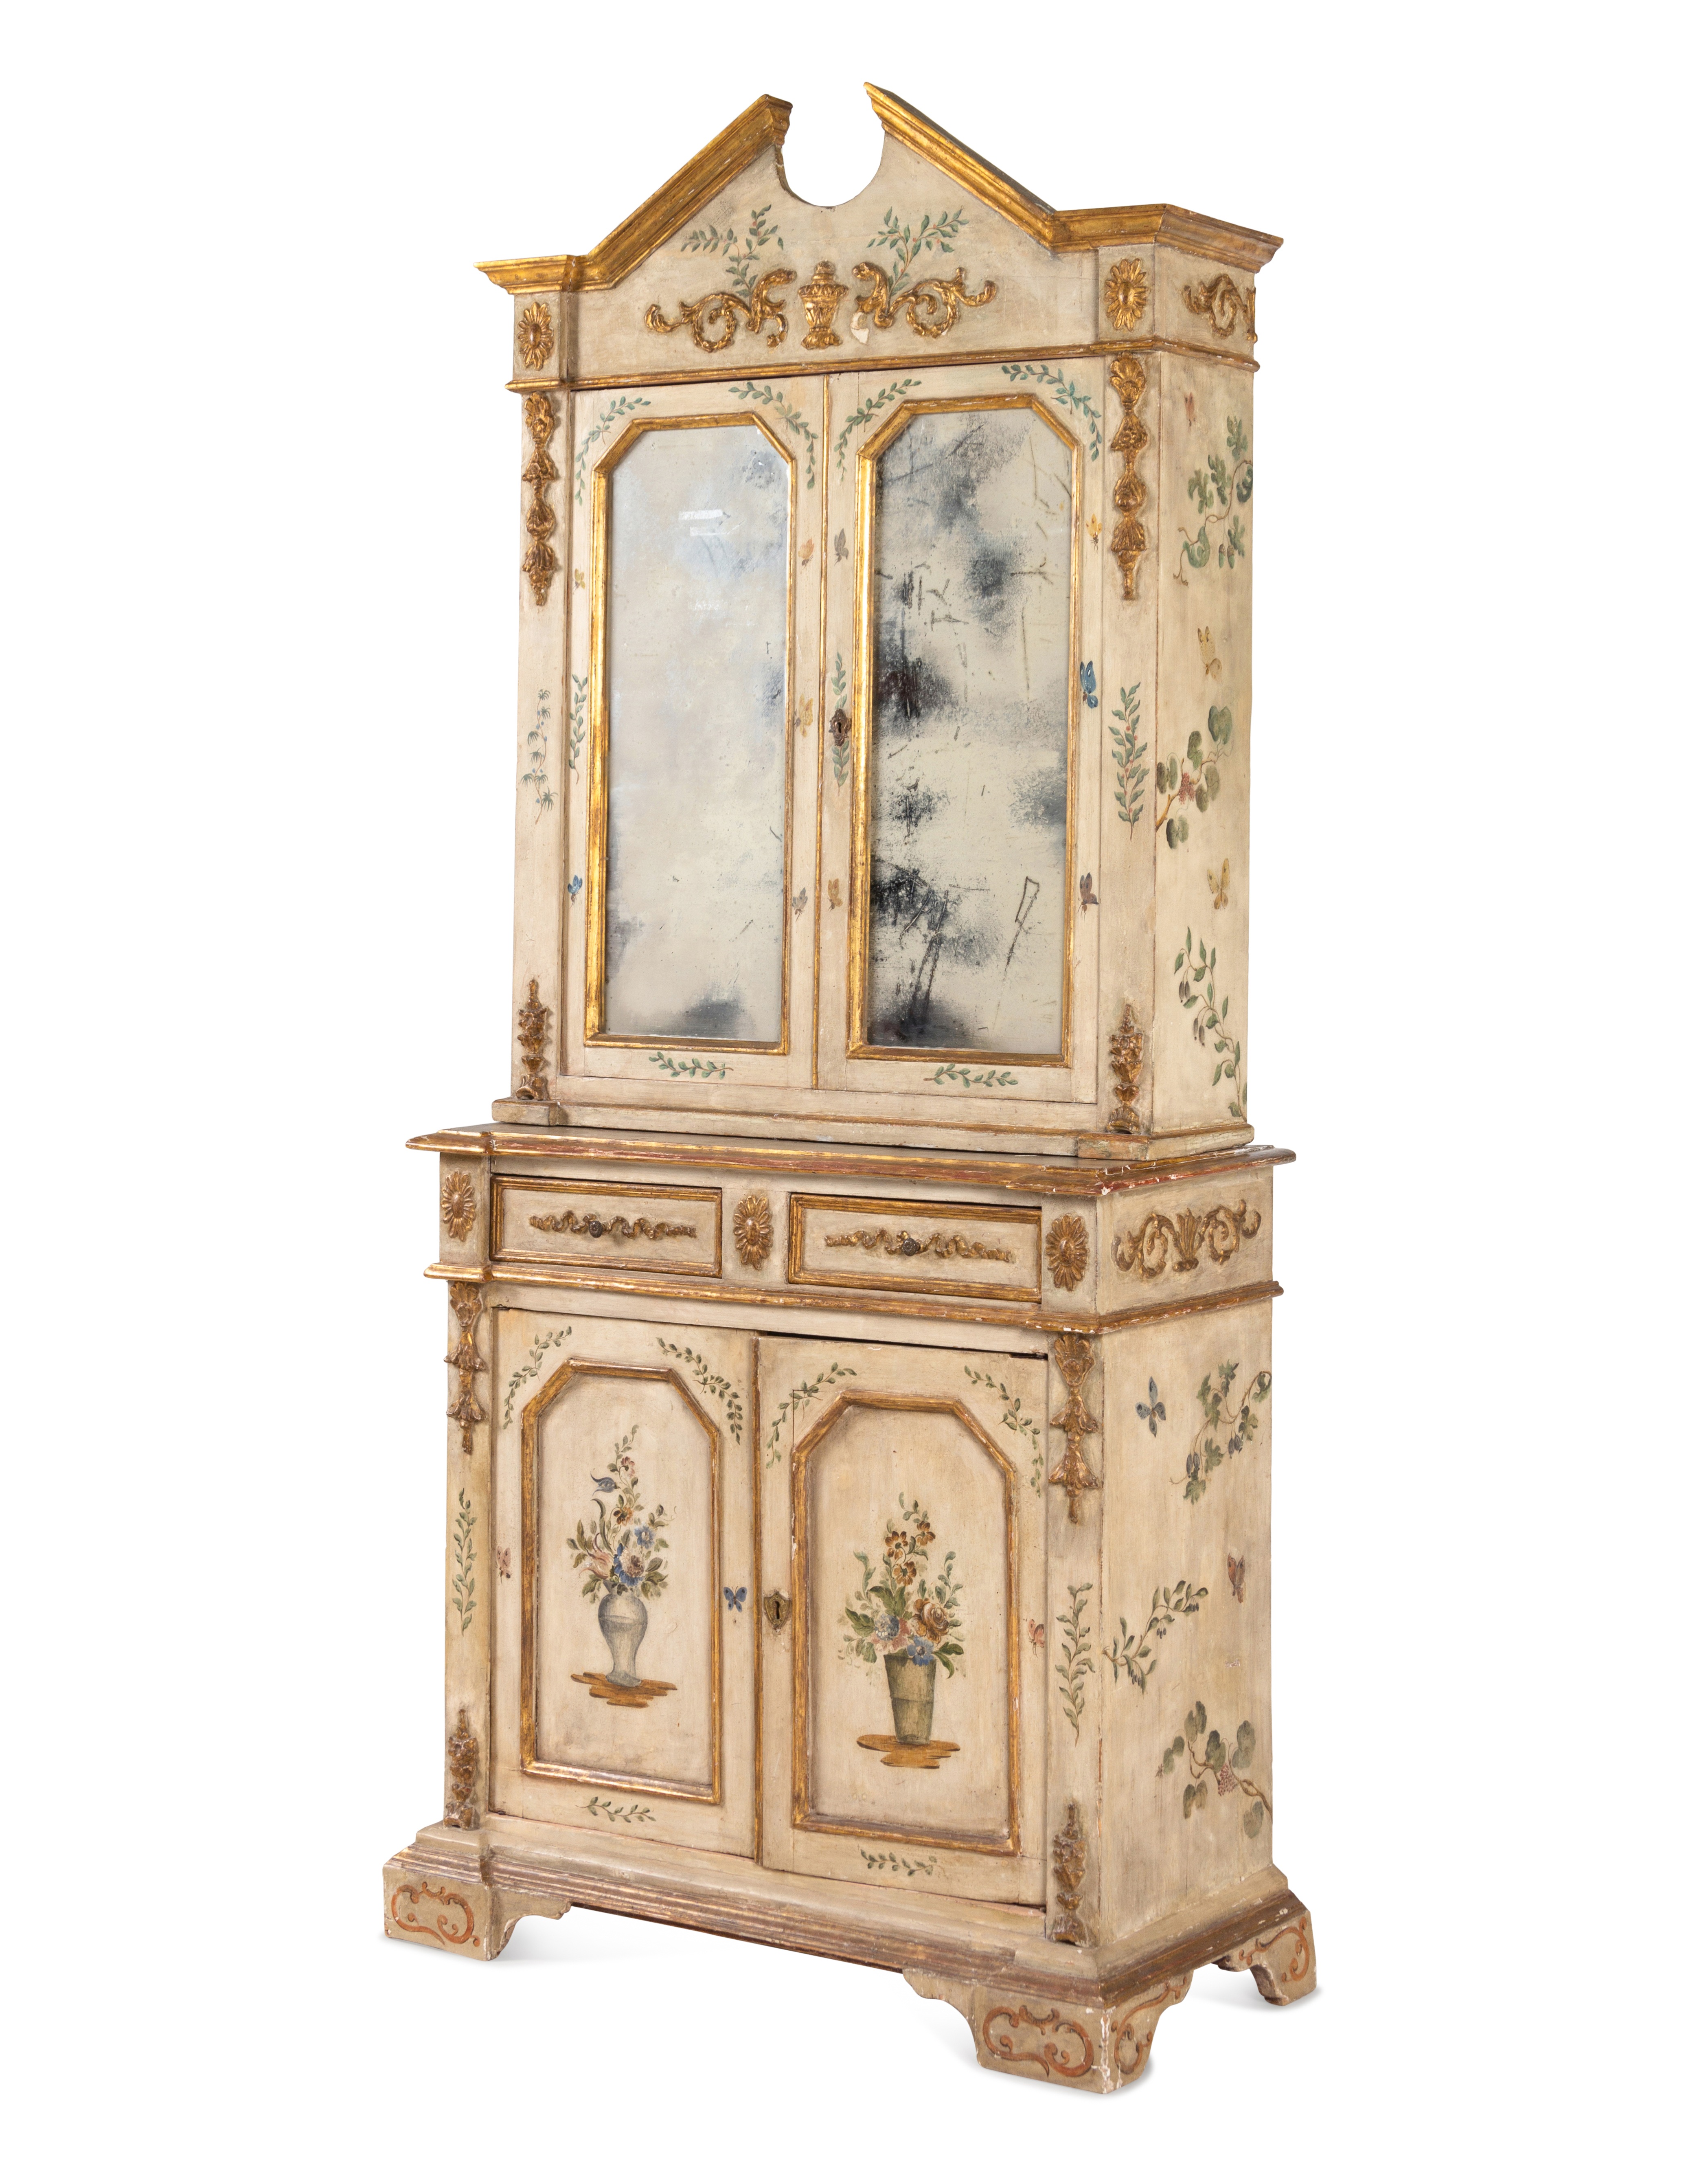 An Italian Polychrome and Cream-Painted and Parcel-Gilt Cabinet - Image 5 of 15